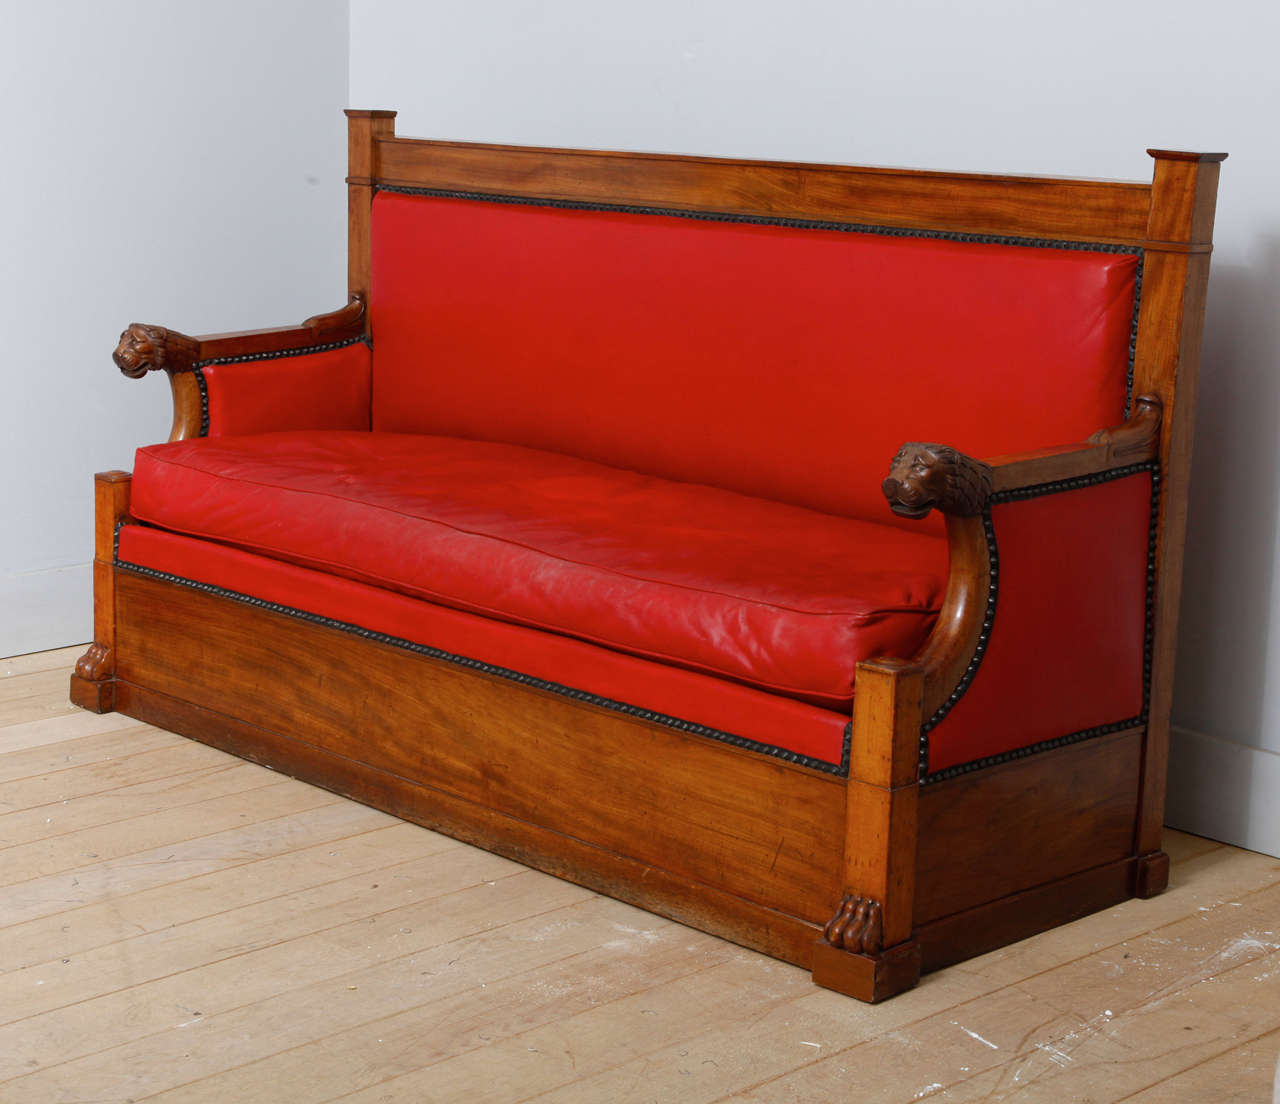 Mahogany Empire settee with upholstery in red leather lined with a black spiked border. The elbow-rests are ending in a carved lion’s head and the front legs in lion paw feet. 

H. 102,50, W. 183 cm, D. 65 cm